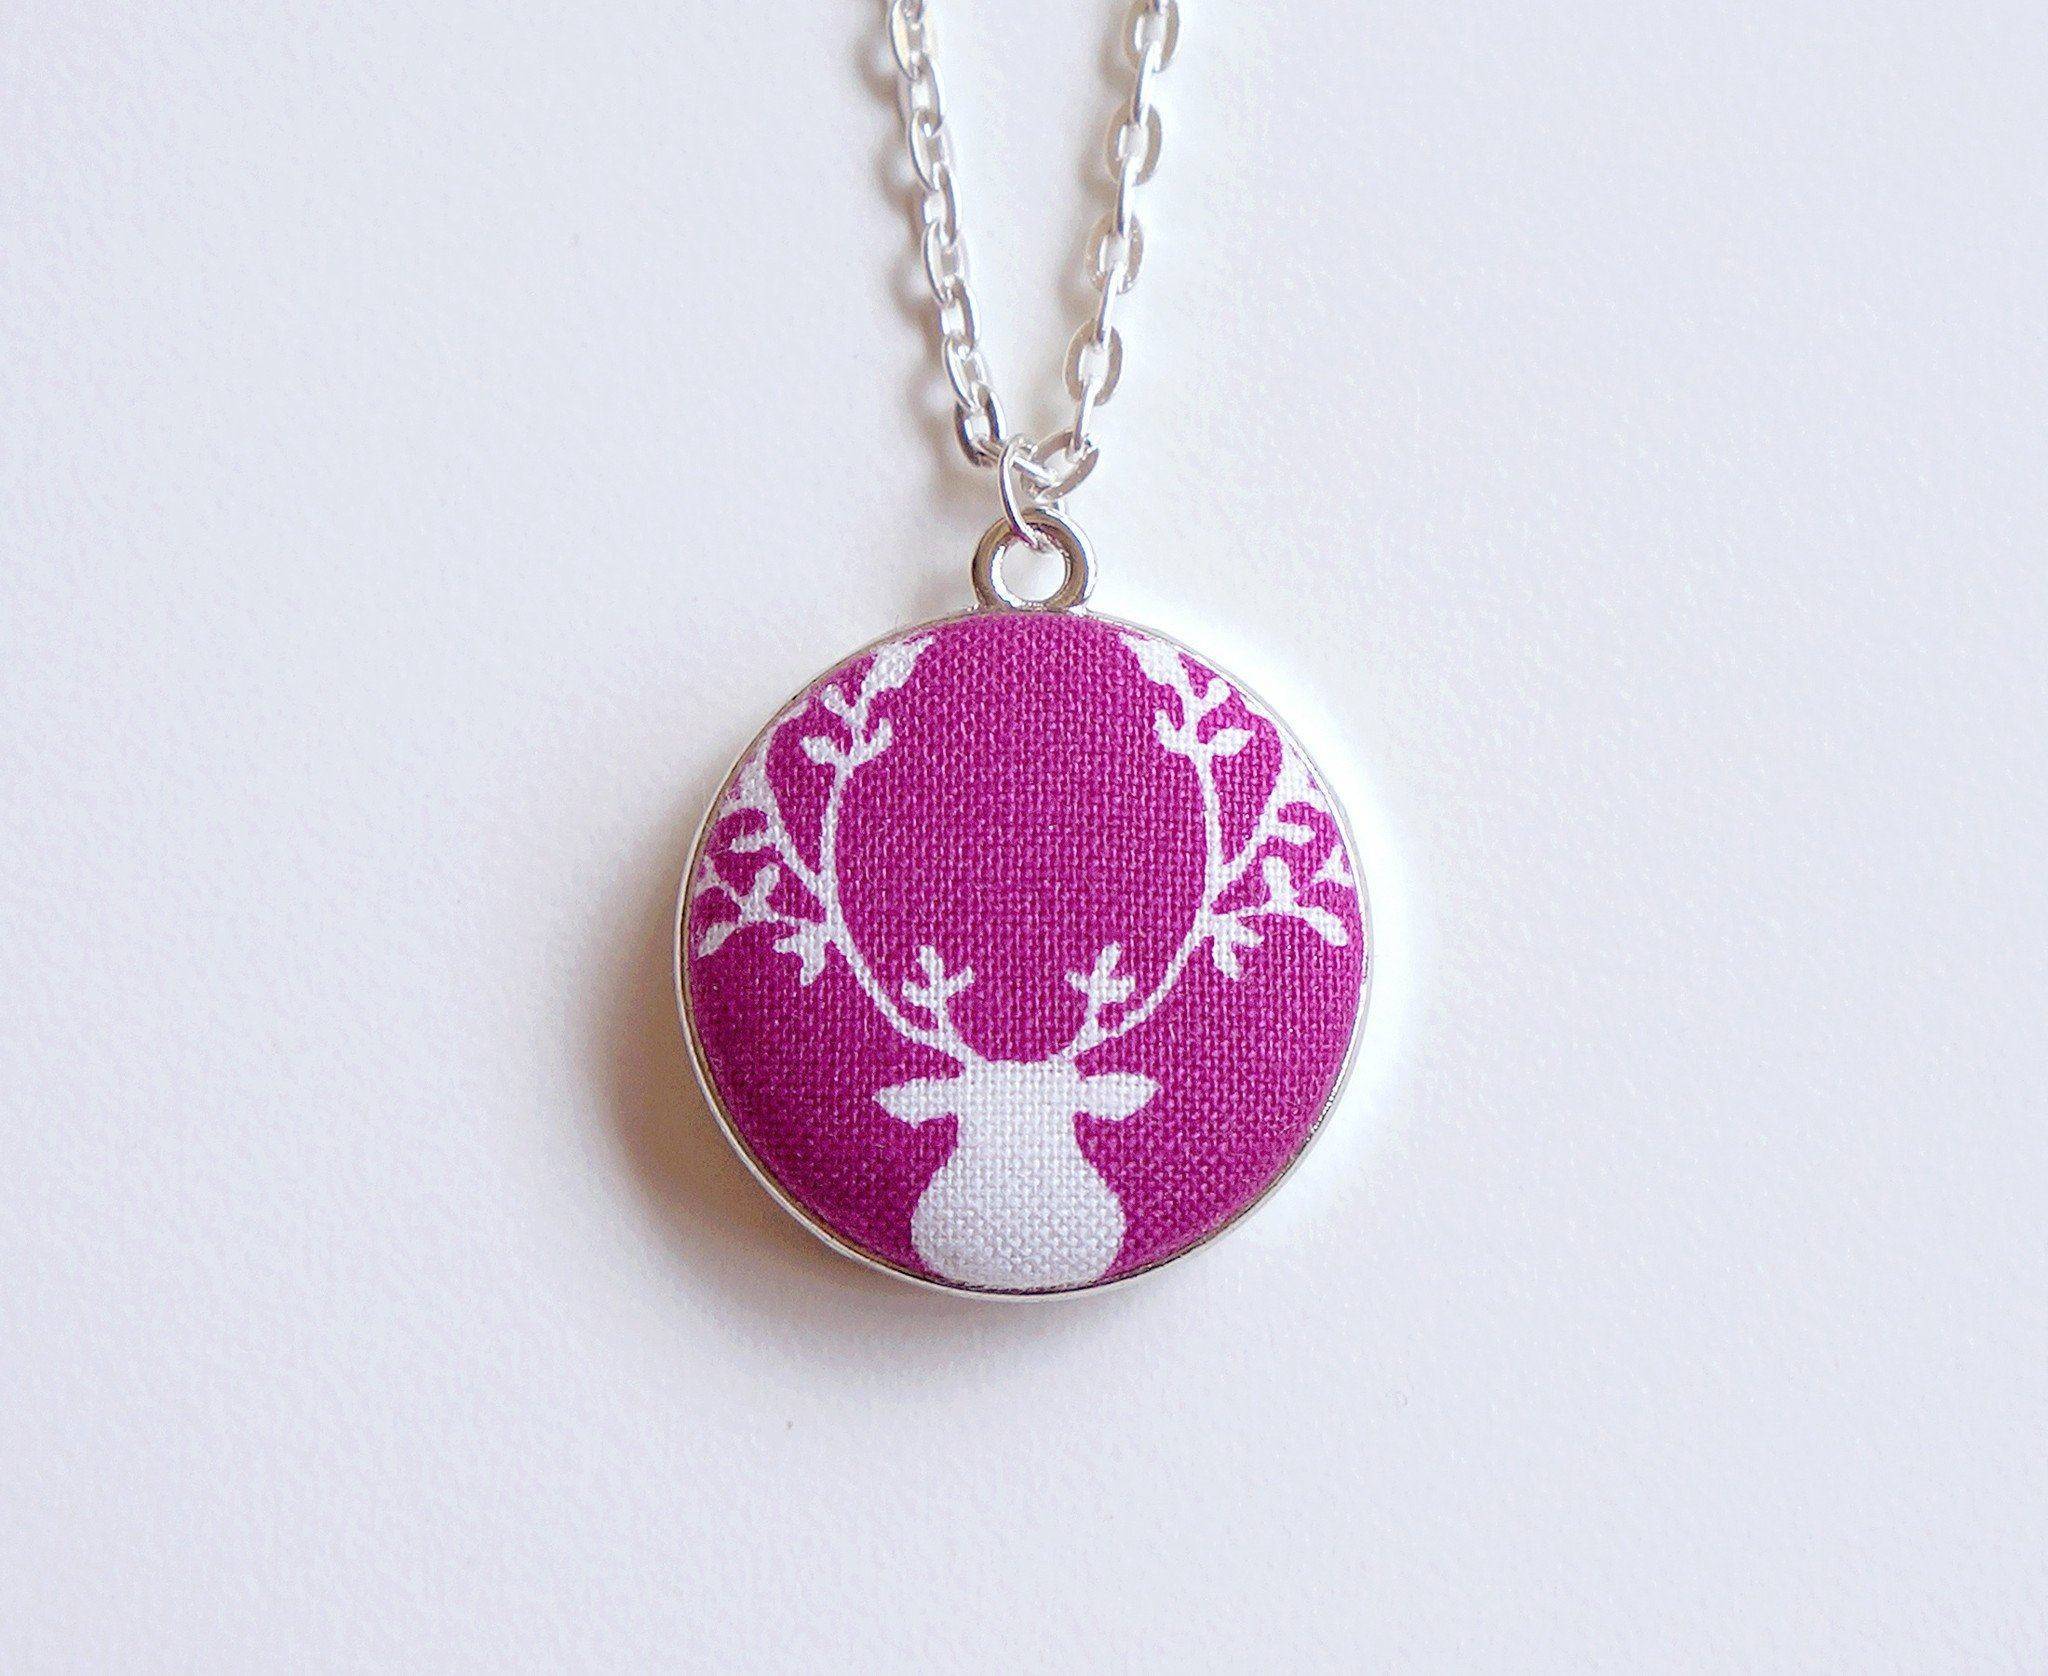 Nara The Deer Handmade Fabric Button Necklace - Necklaces - Paperdaise Accessories - Naiise